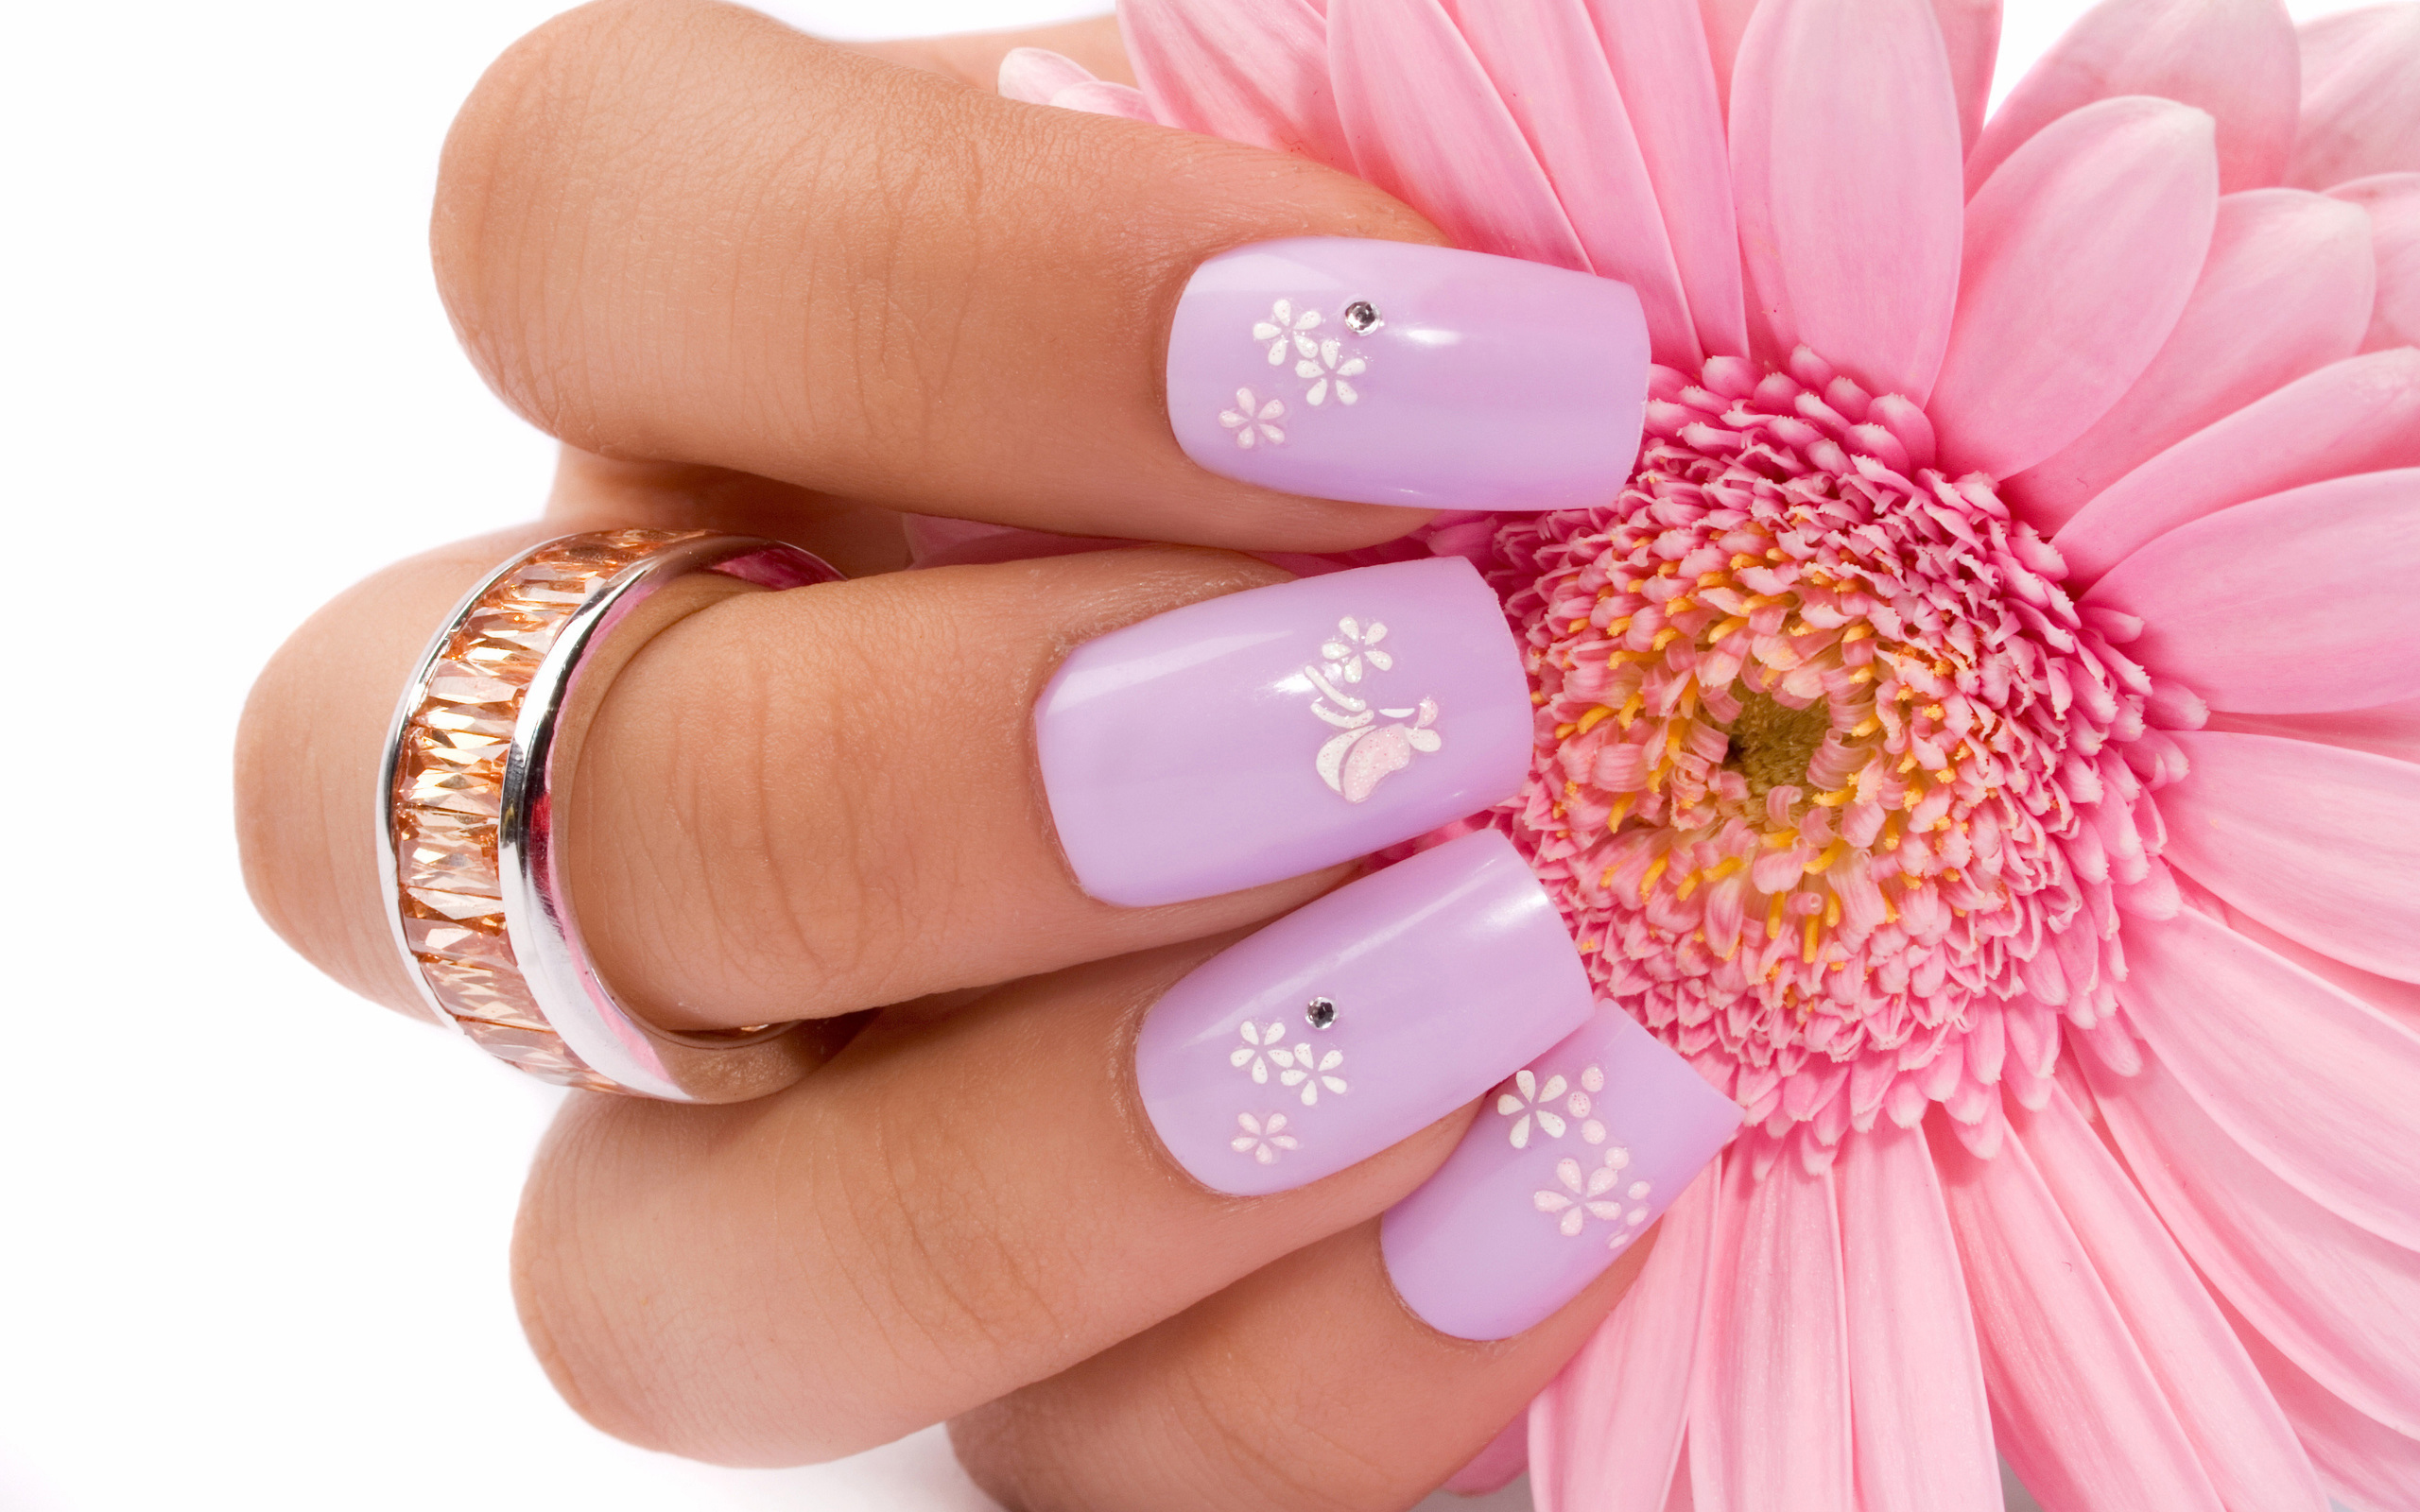 3. Colorful Nail Art HD Wallpapers - wide 8